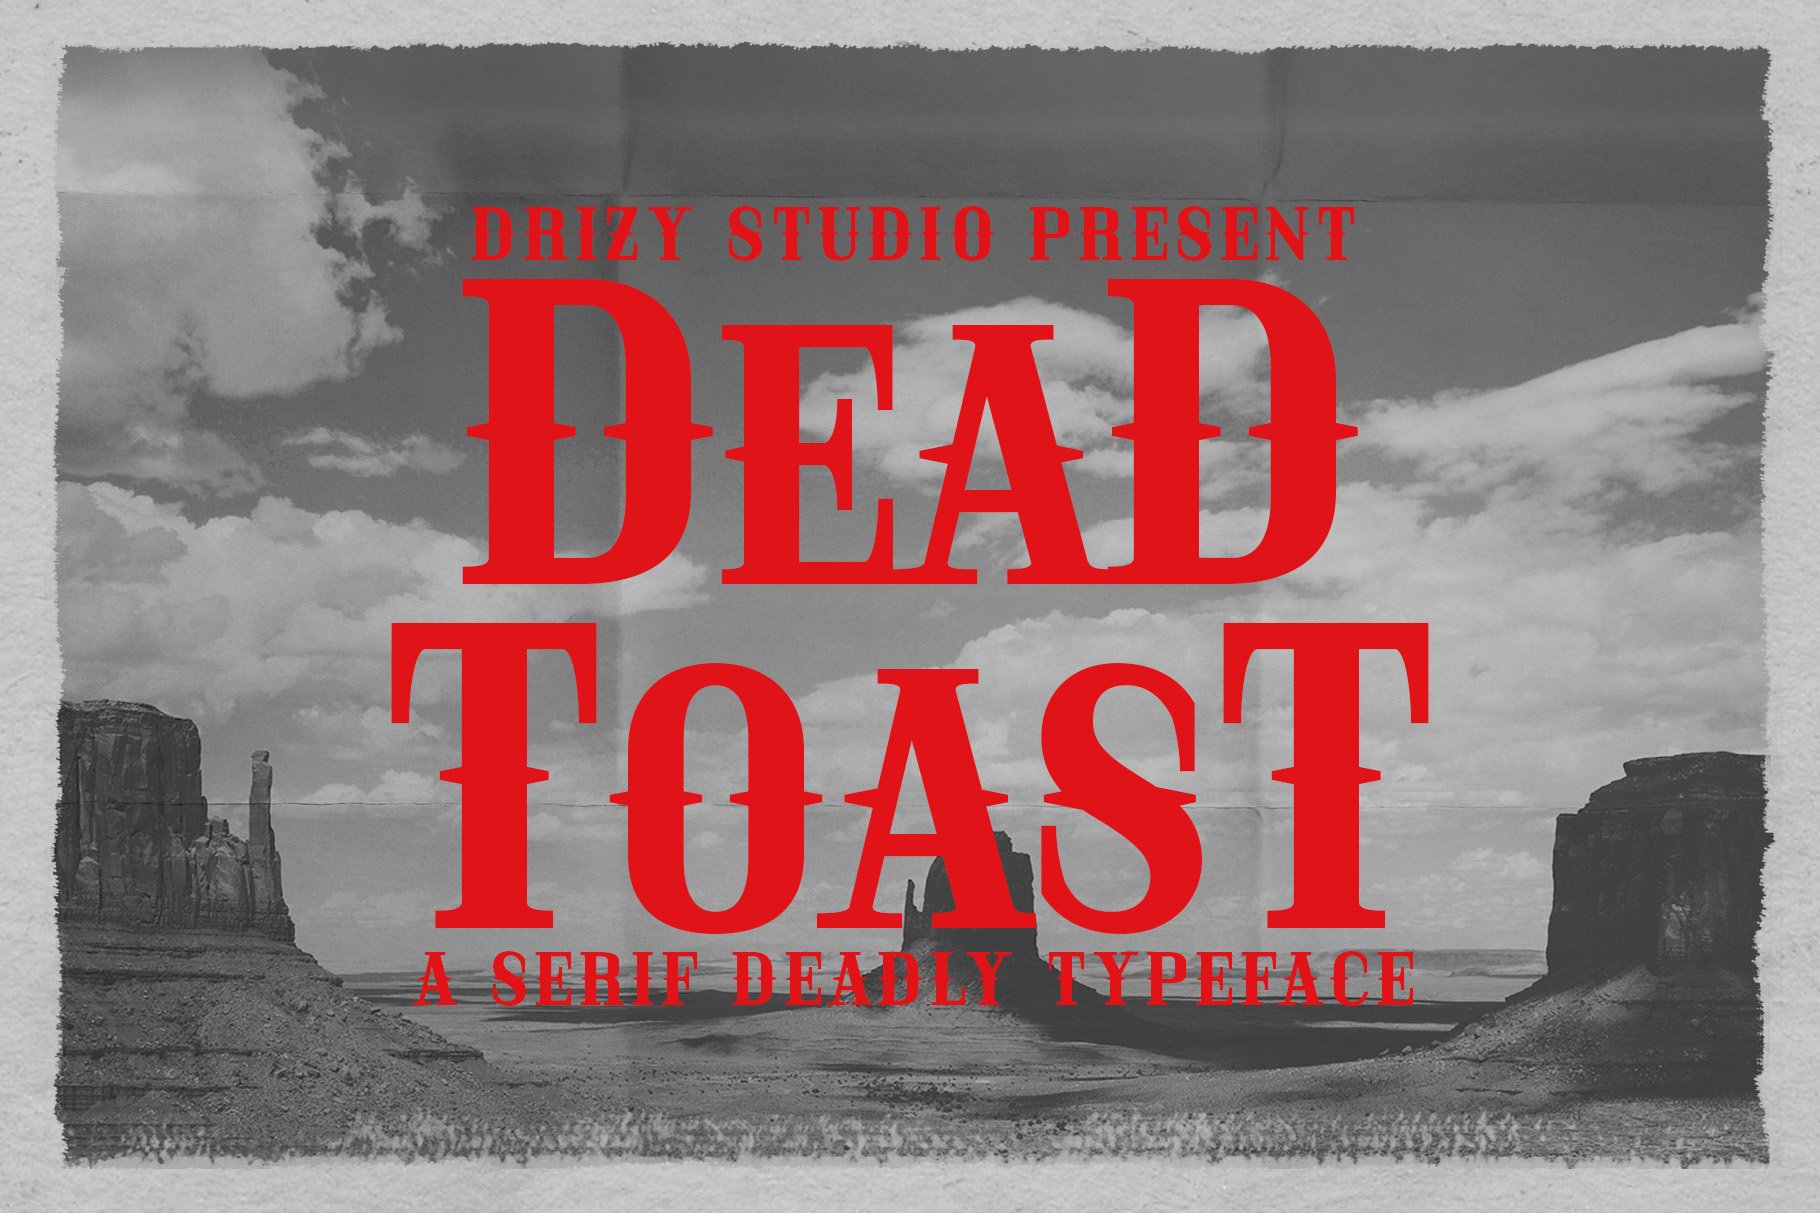 Deadtoast - Deadly Halloween Font cover image.